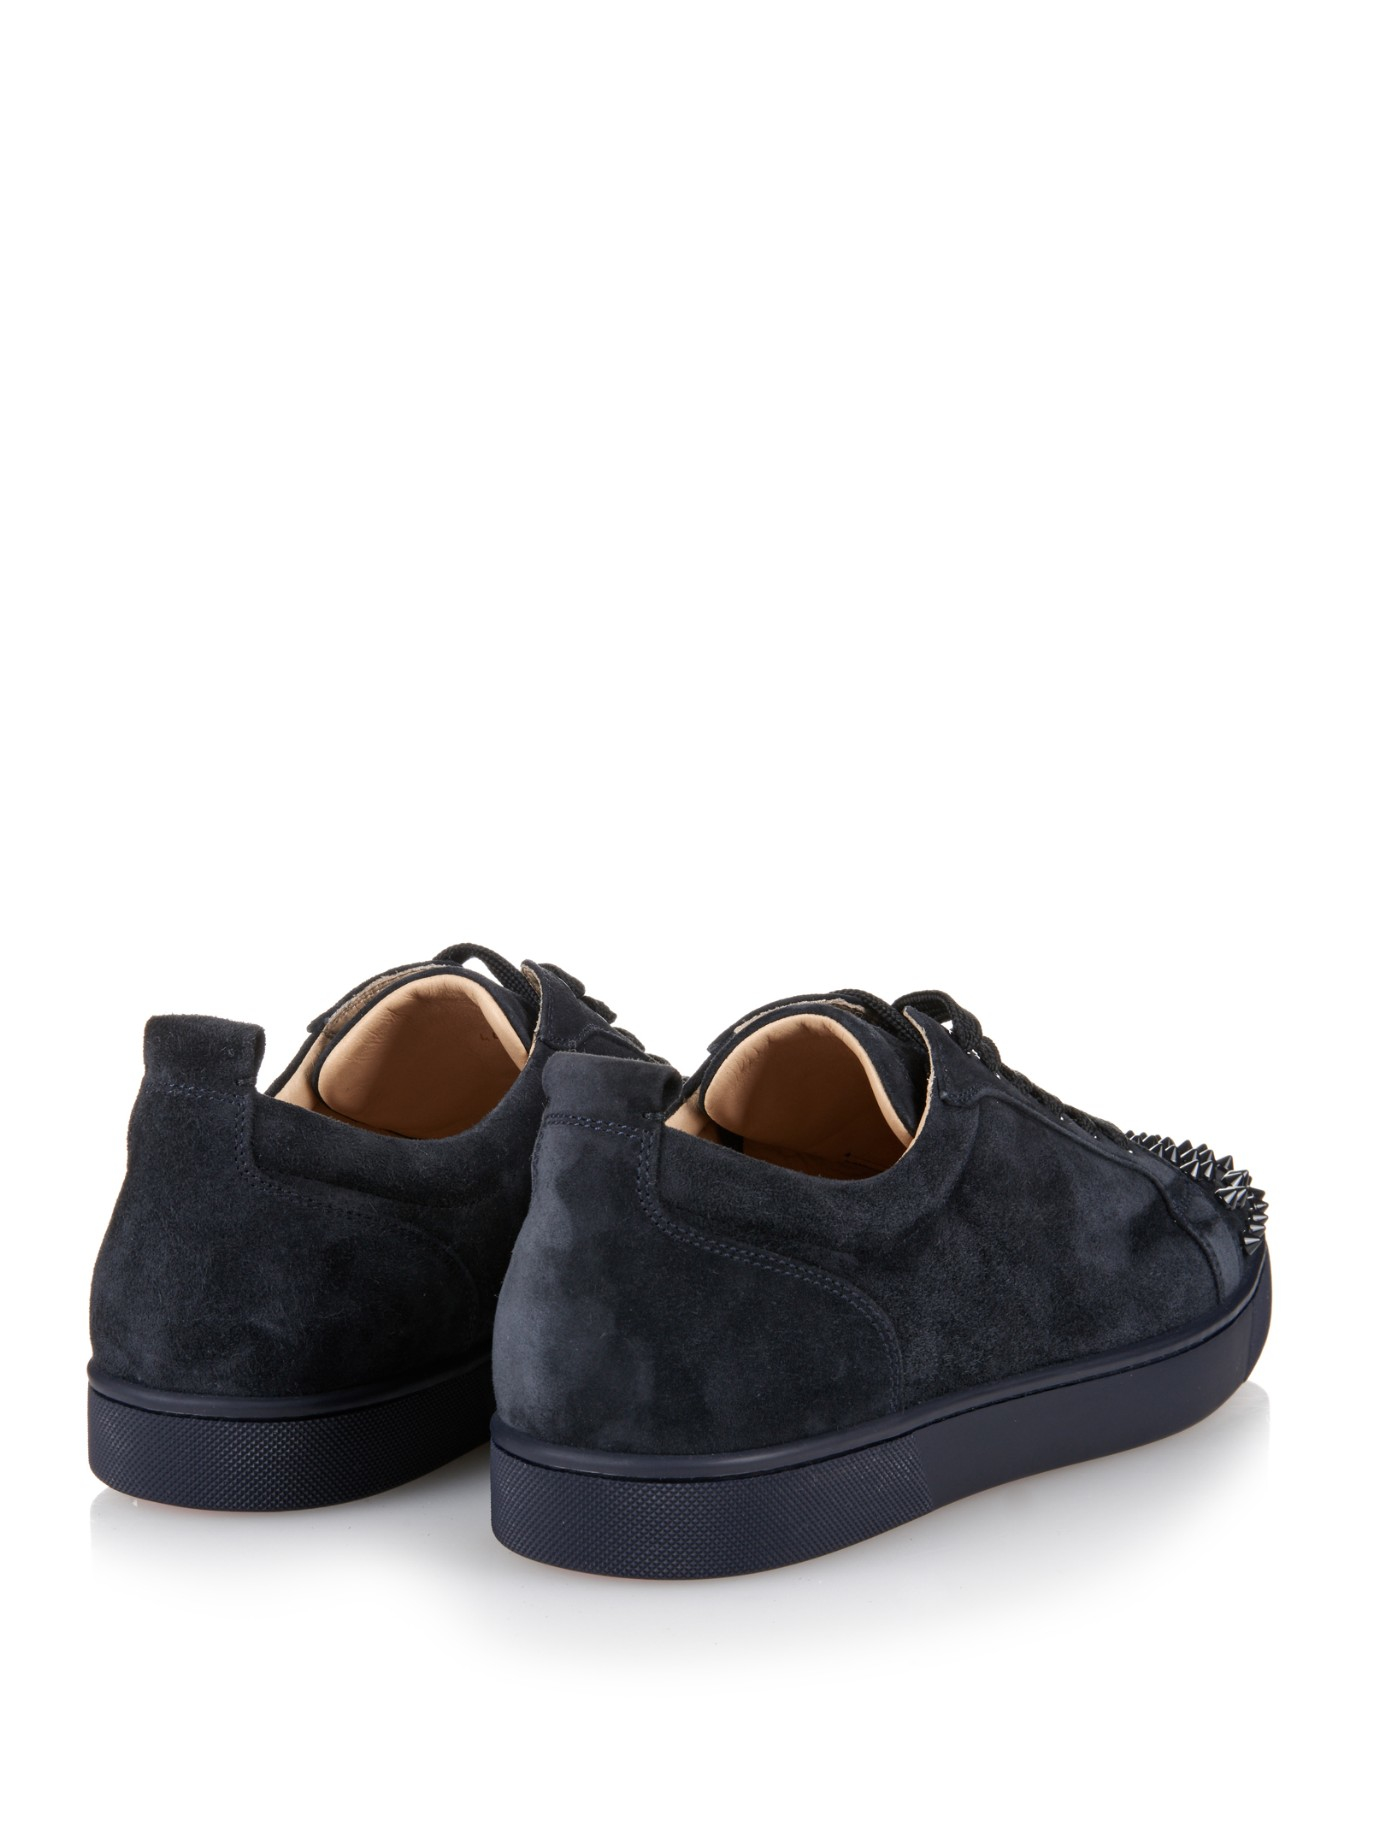 Christian Louboutin Low-Top Sneakers in Navy (Blue) for Men - Lyst